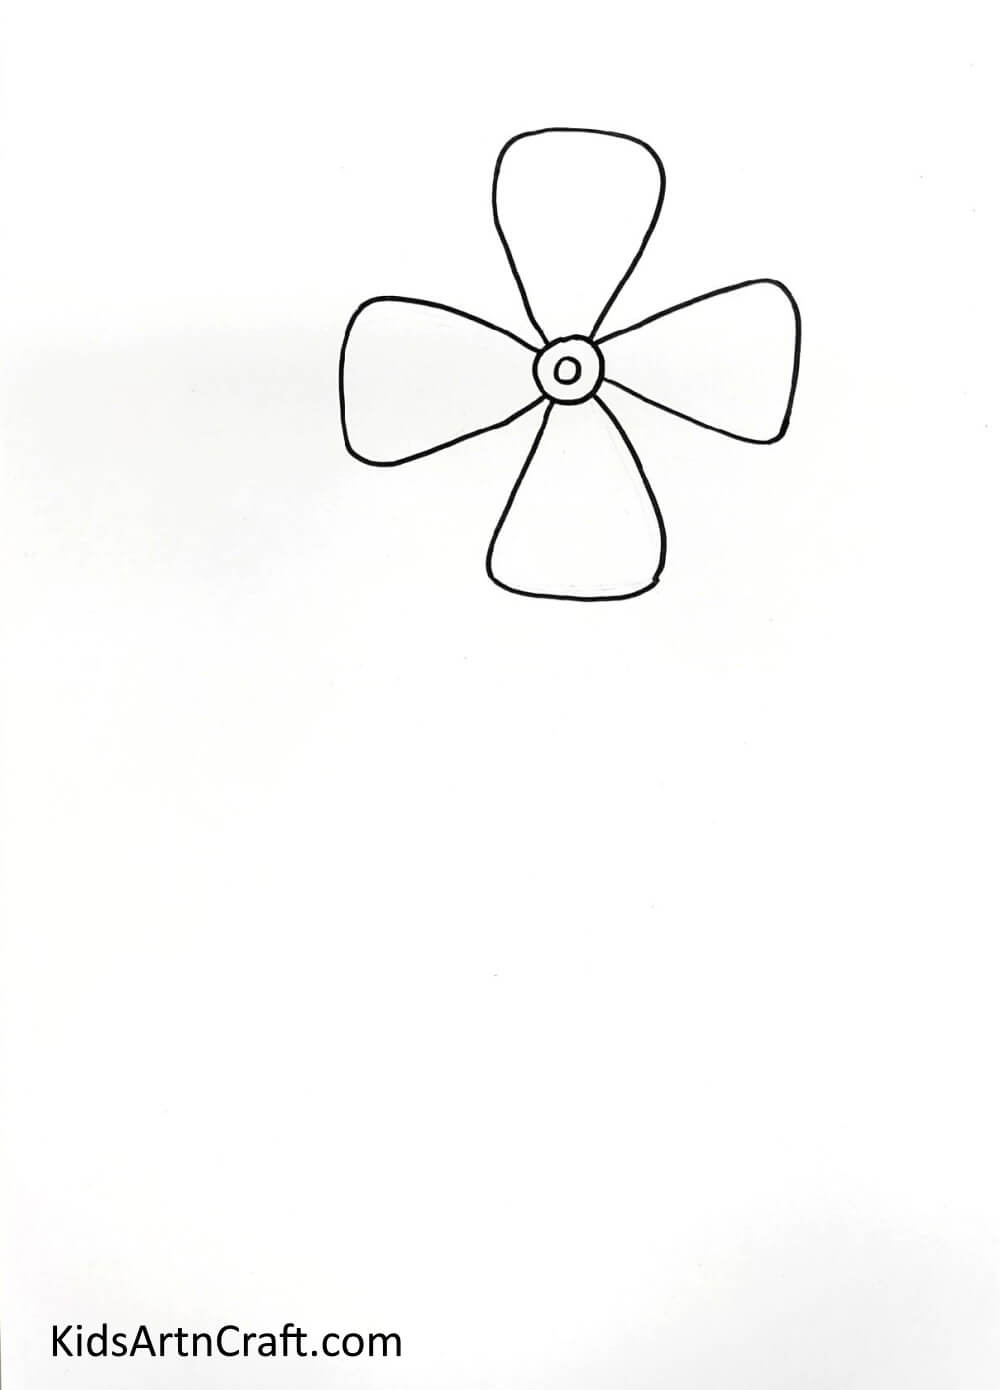 Drawing Fan - Demonstration of How to Draw and Color a Windmill for Children